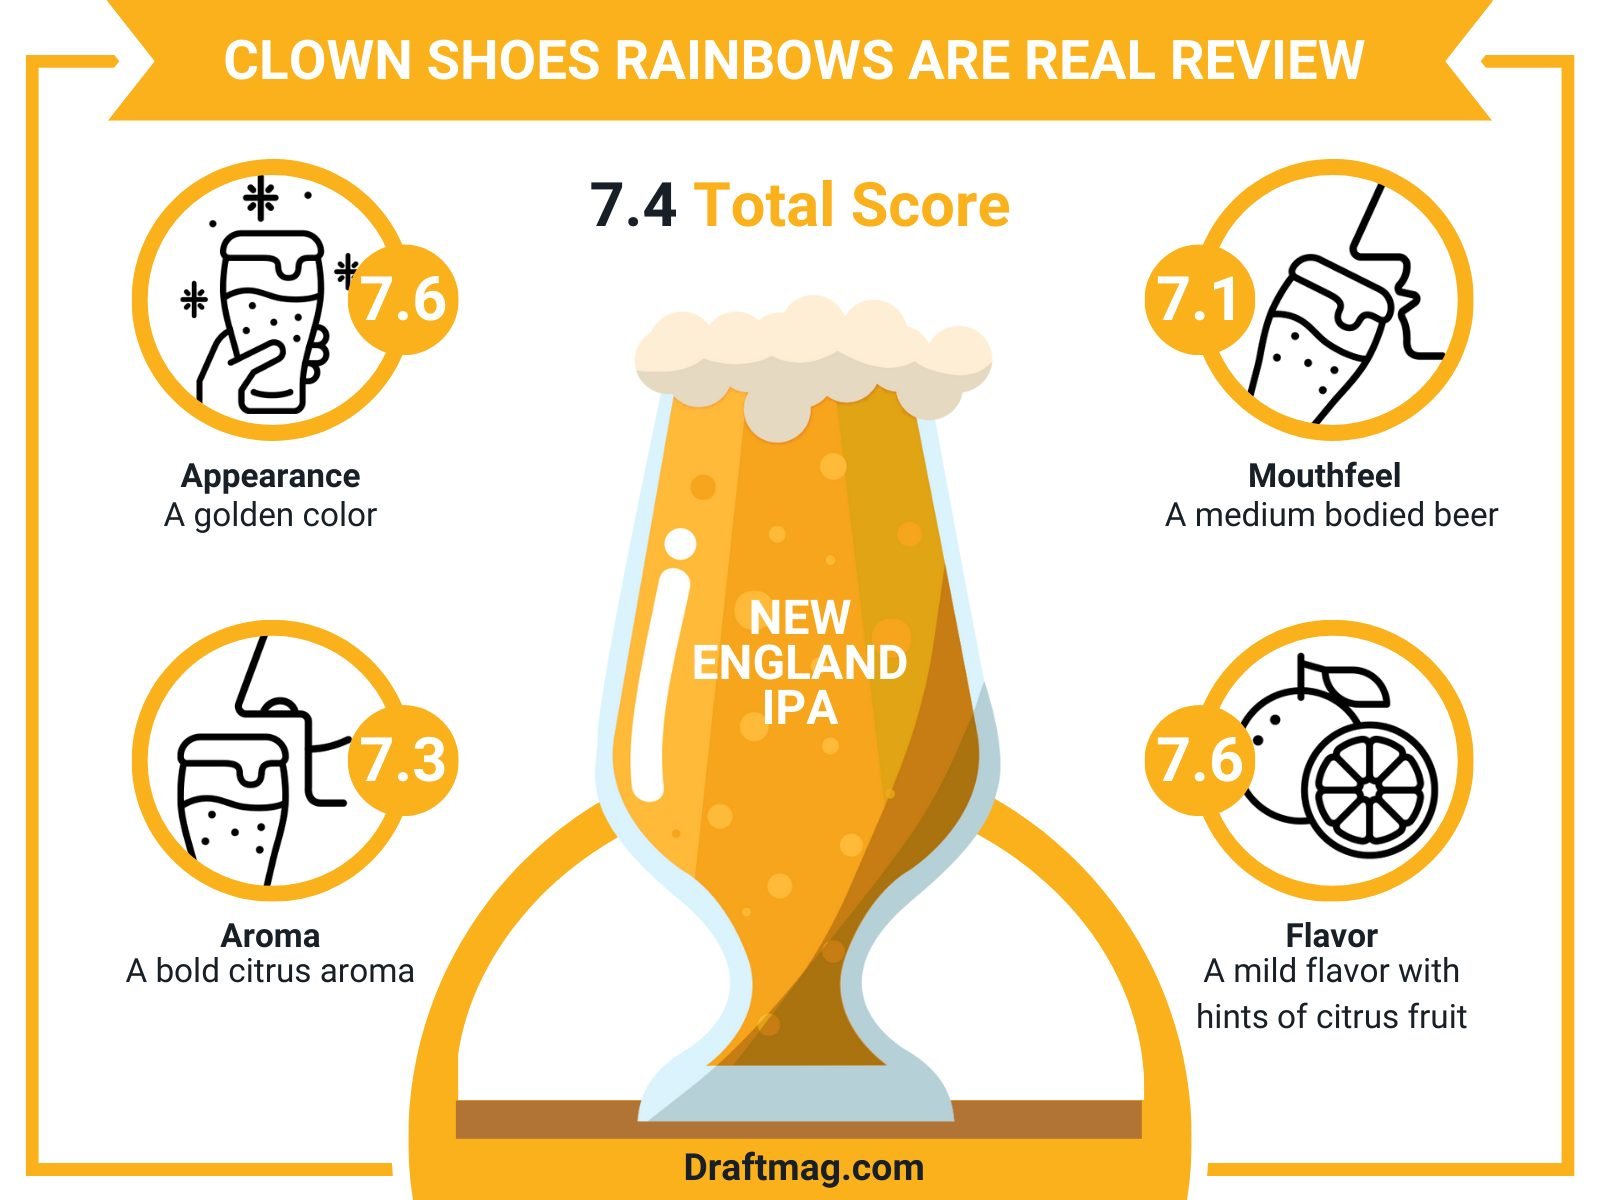 Clown Shoes Review Infographic